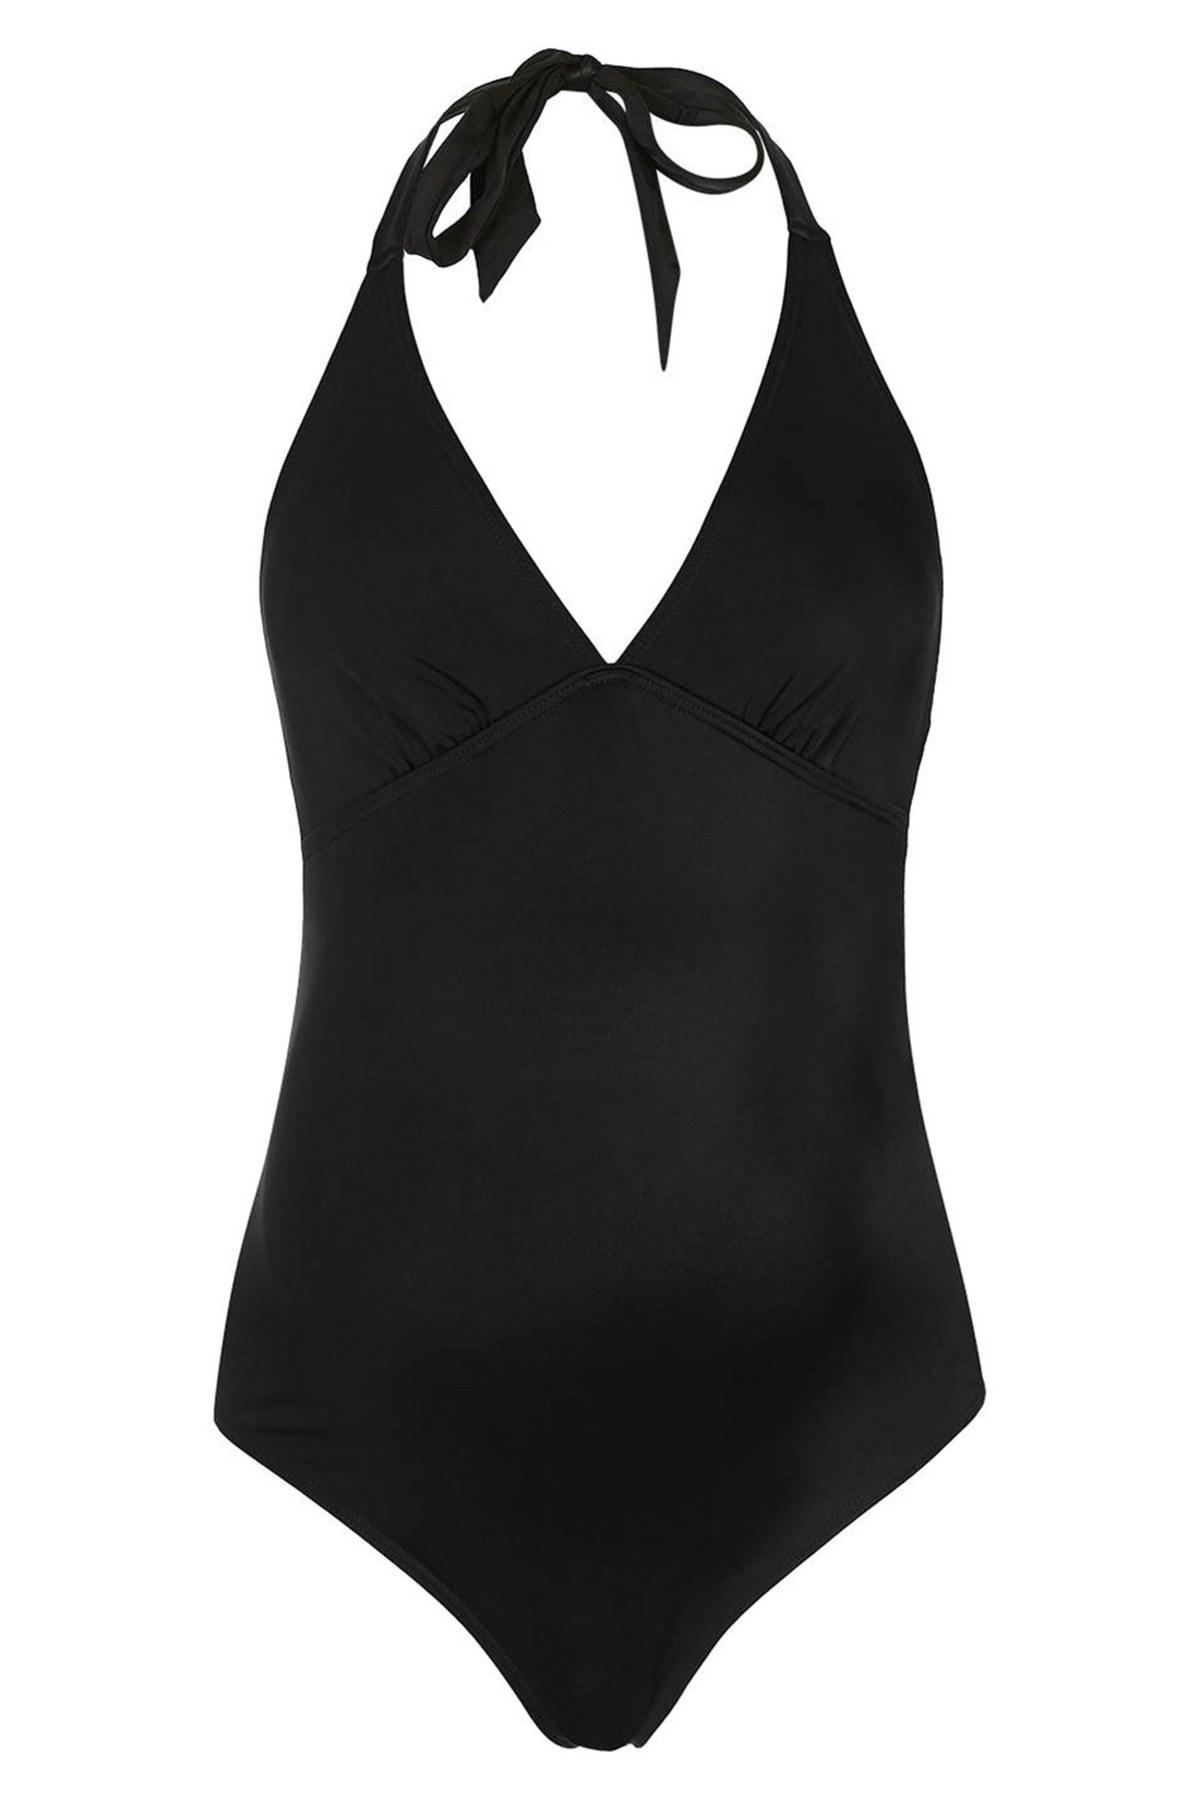 Lyst - TOPSHOP Solid Halter One-piece Maternity Swimsuit in Black